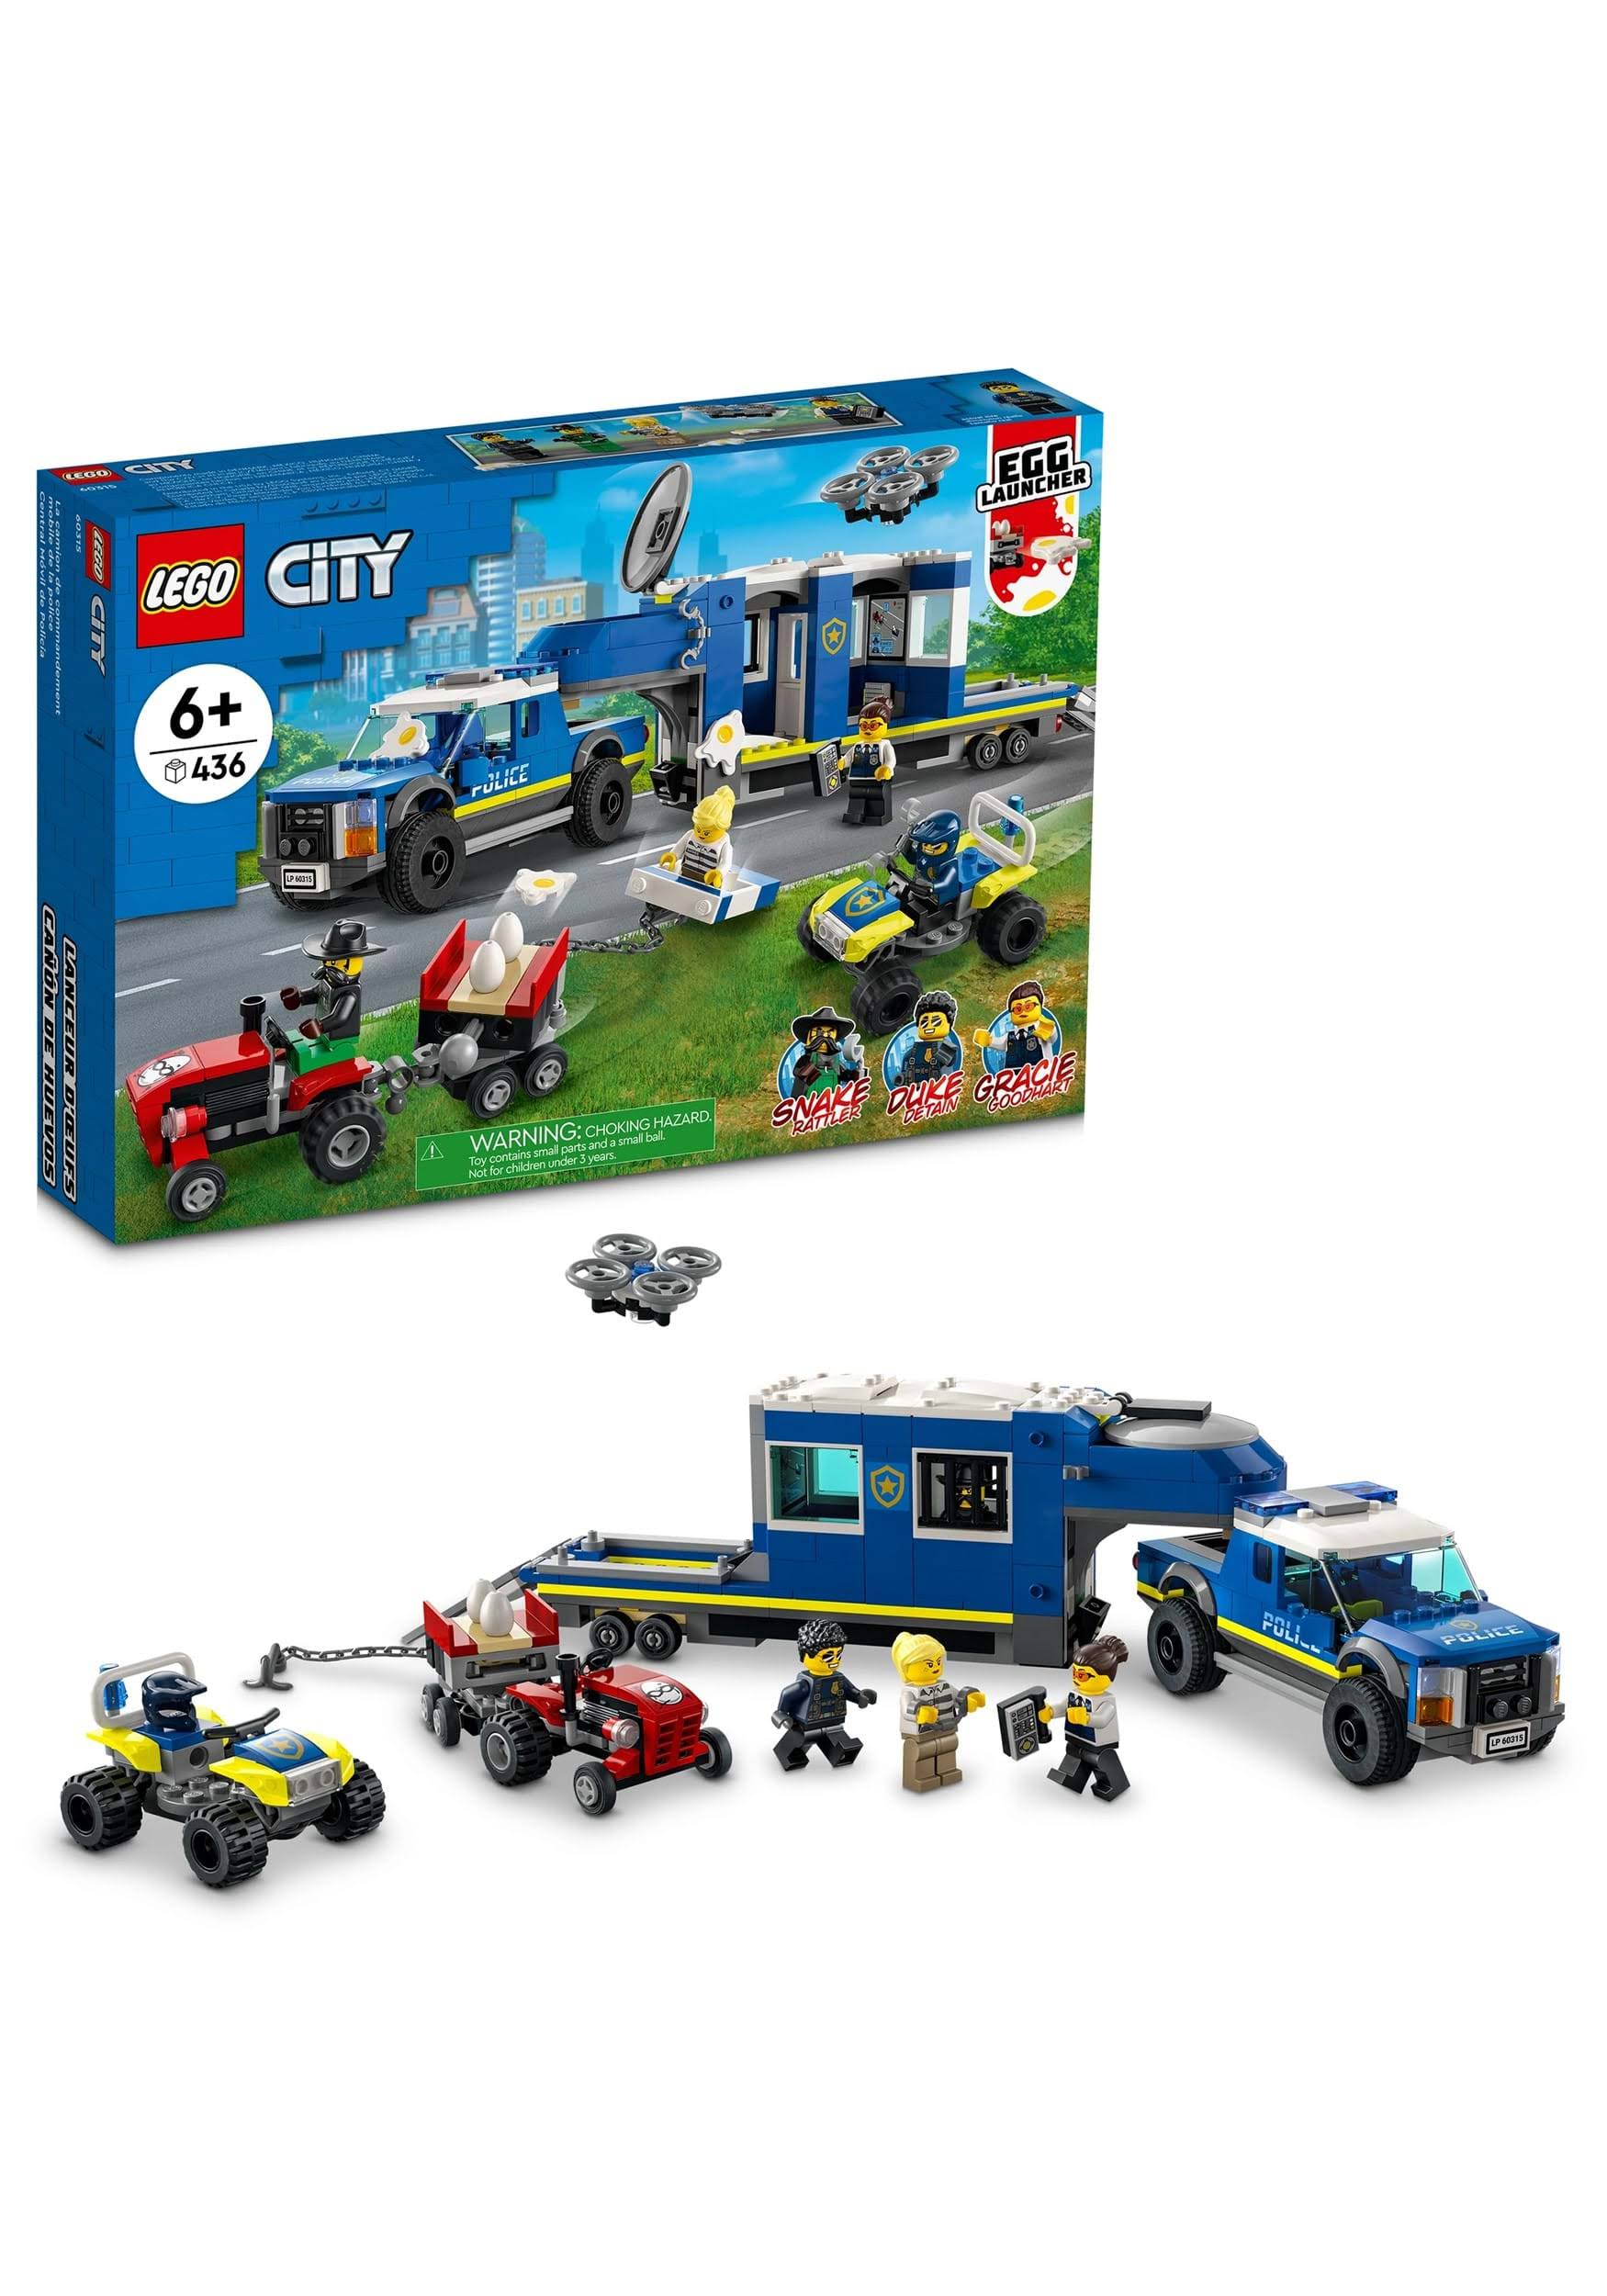 LEGO 60315 Police Mobile Command Truck